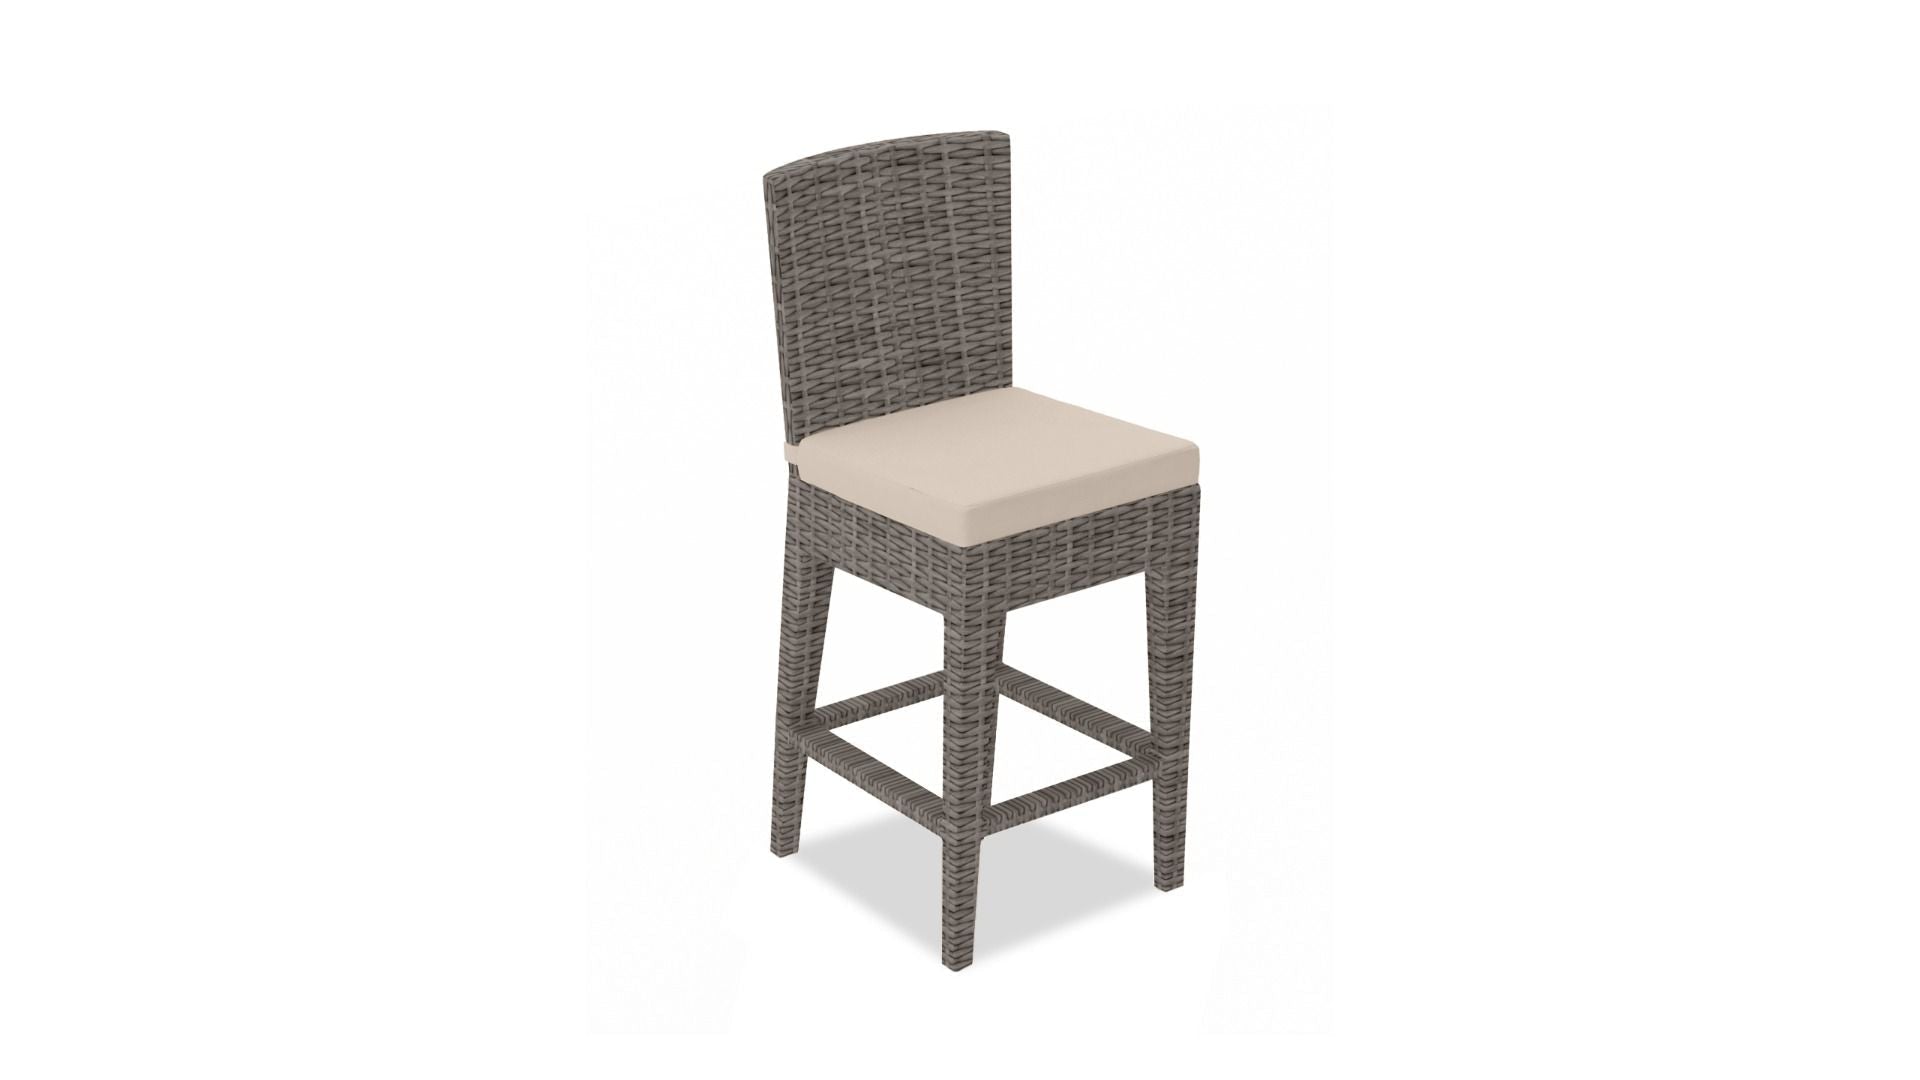 Harmonia Living Outdoor Furniture Canvas flax Harmonia Living - Dune Counter Height Chair | HL-DUNE-DW-CHC